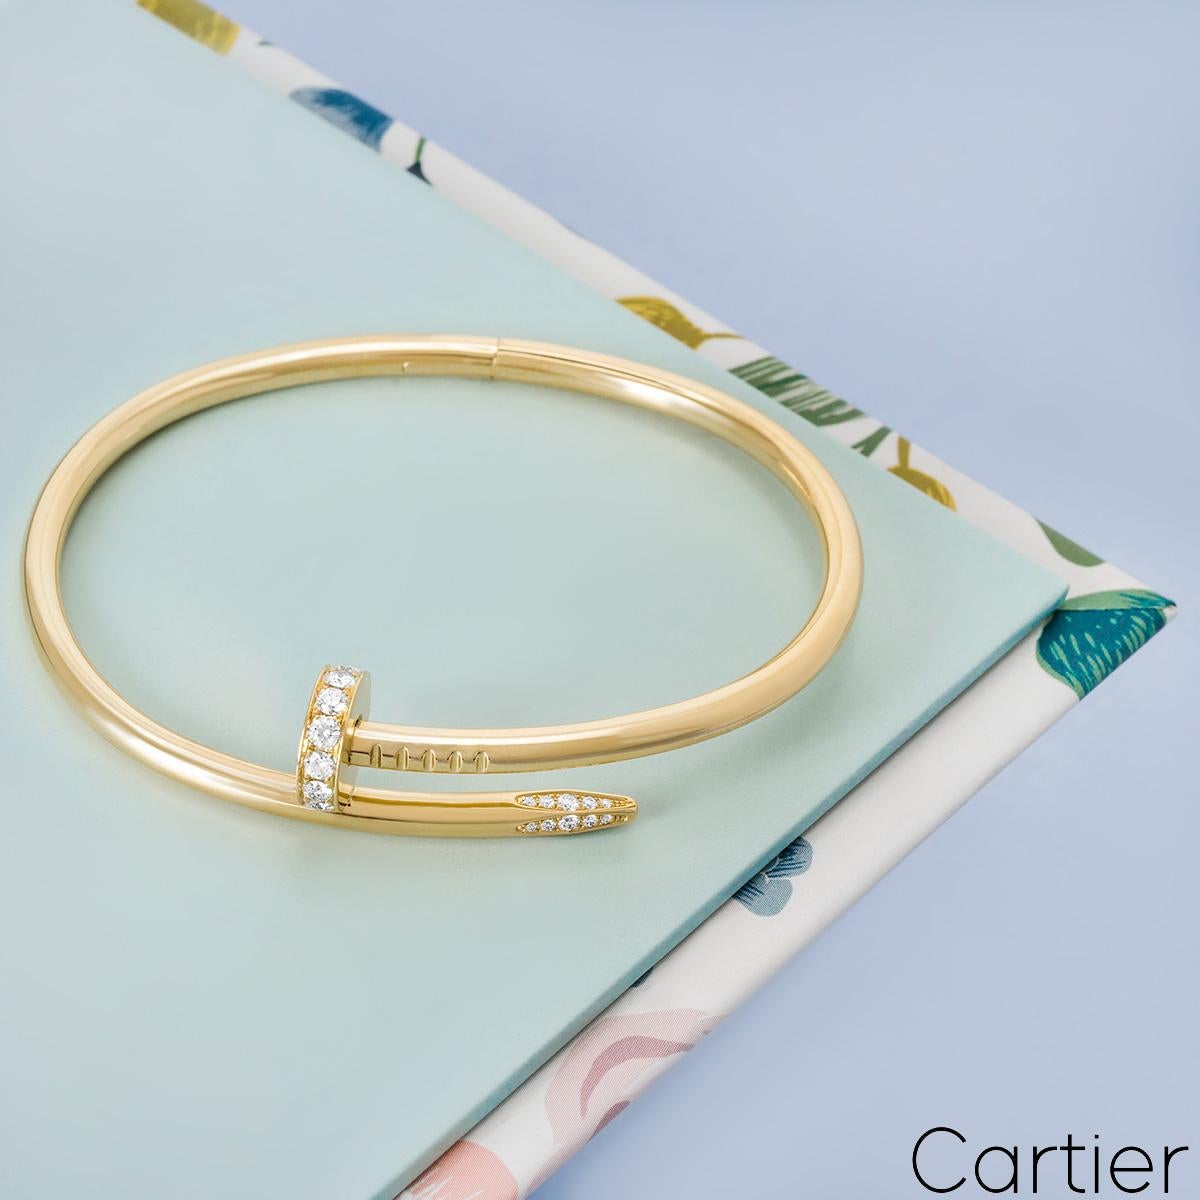 Cartier Yellow Gold Diamond Juste Un Clou Bracelet Size 18 B6048618 In Excellent Condition For Sale In London, GB